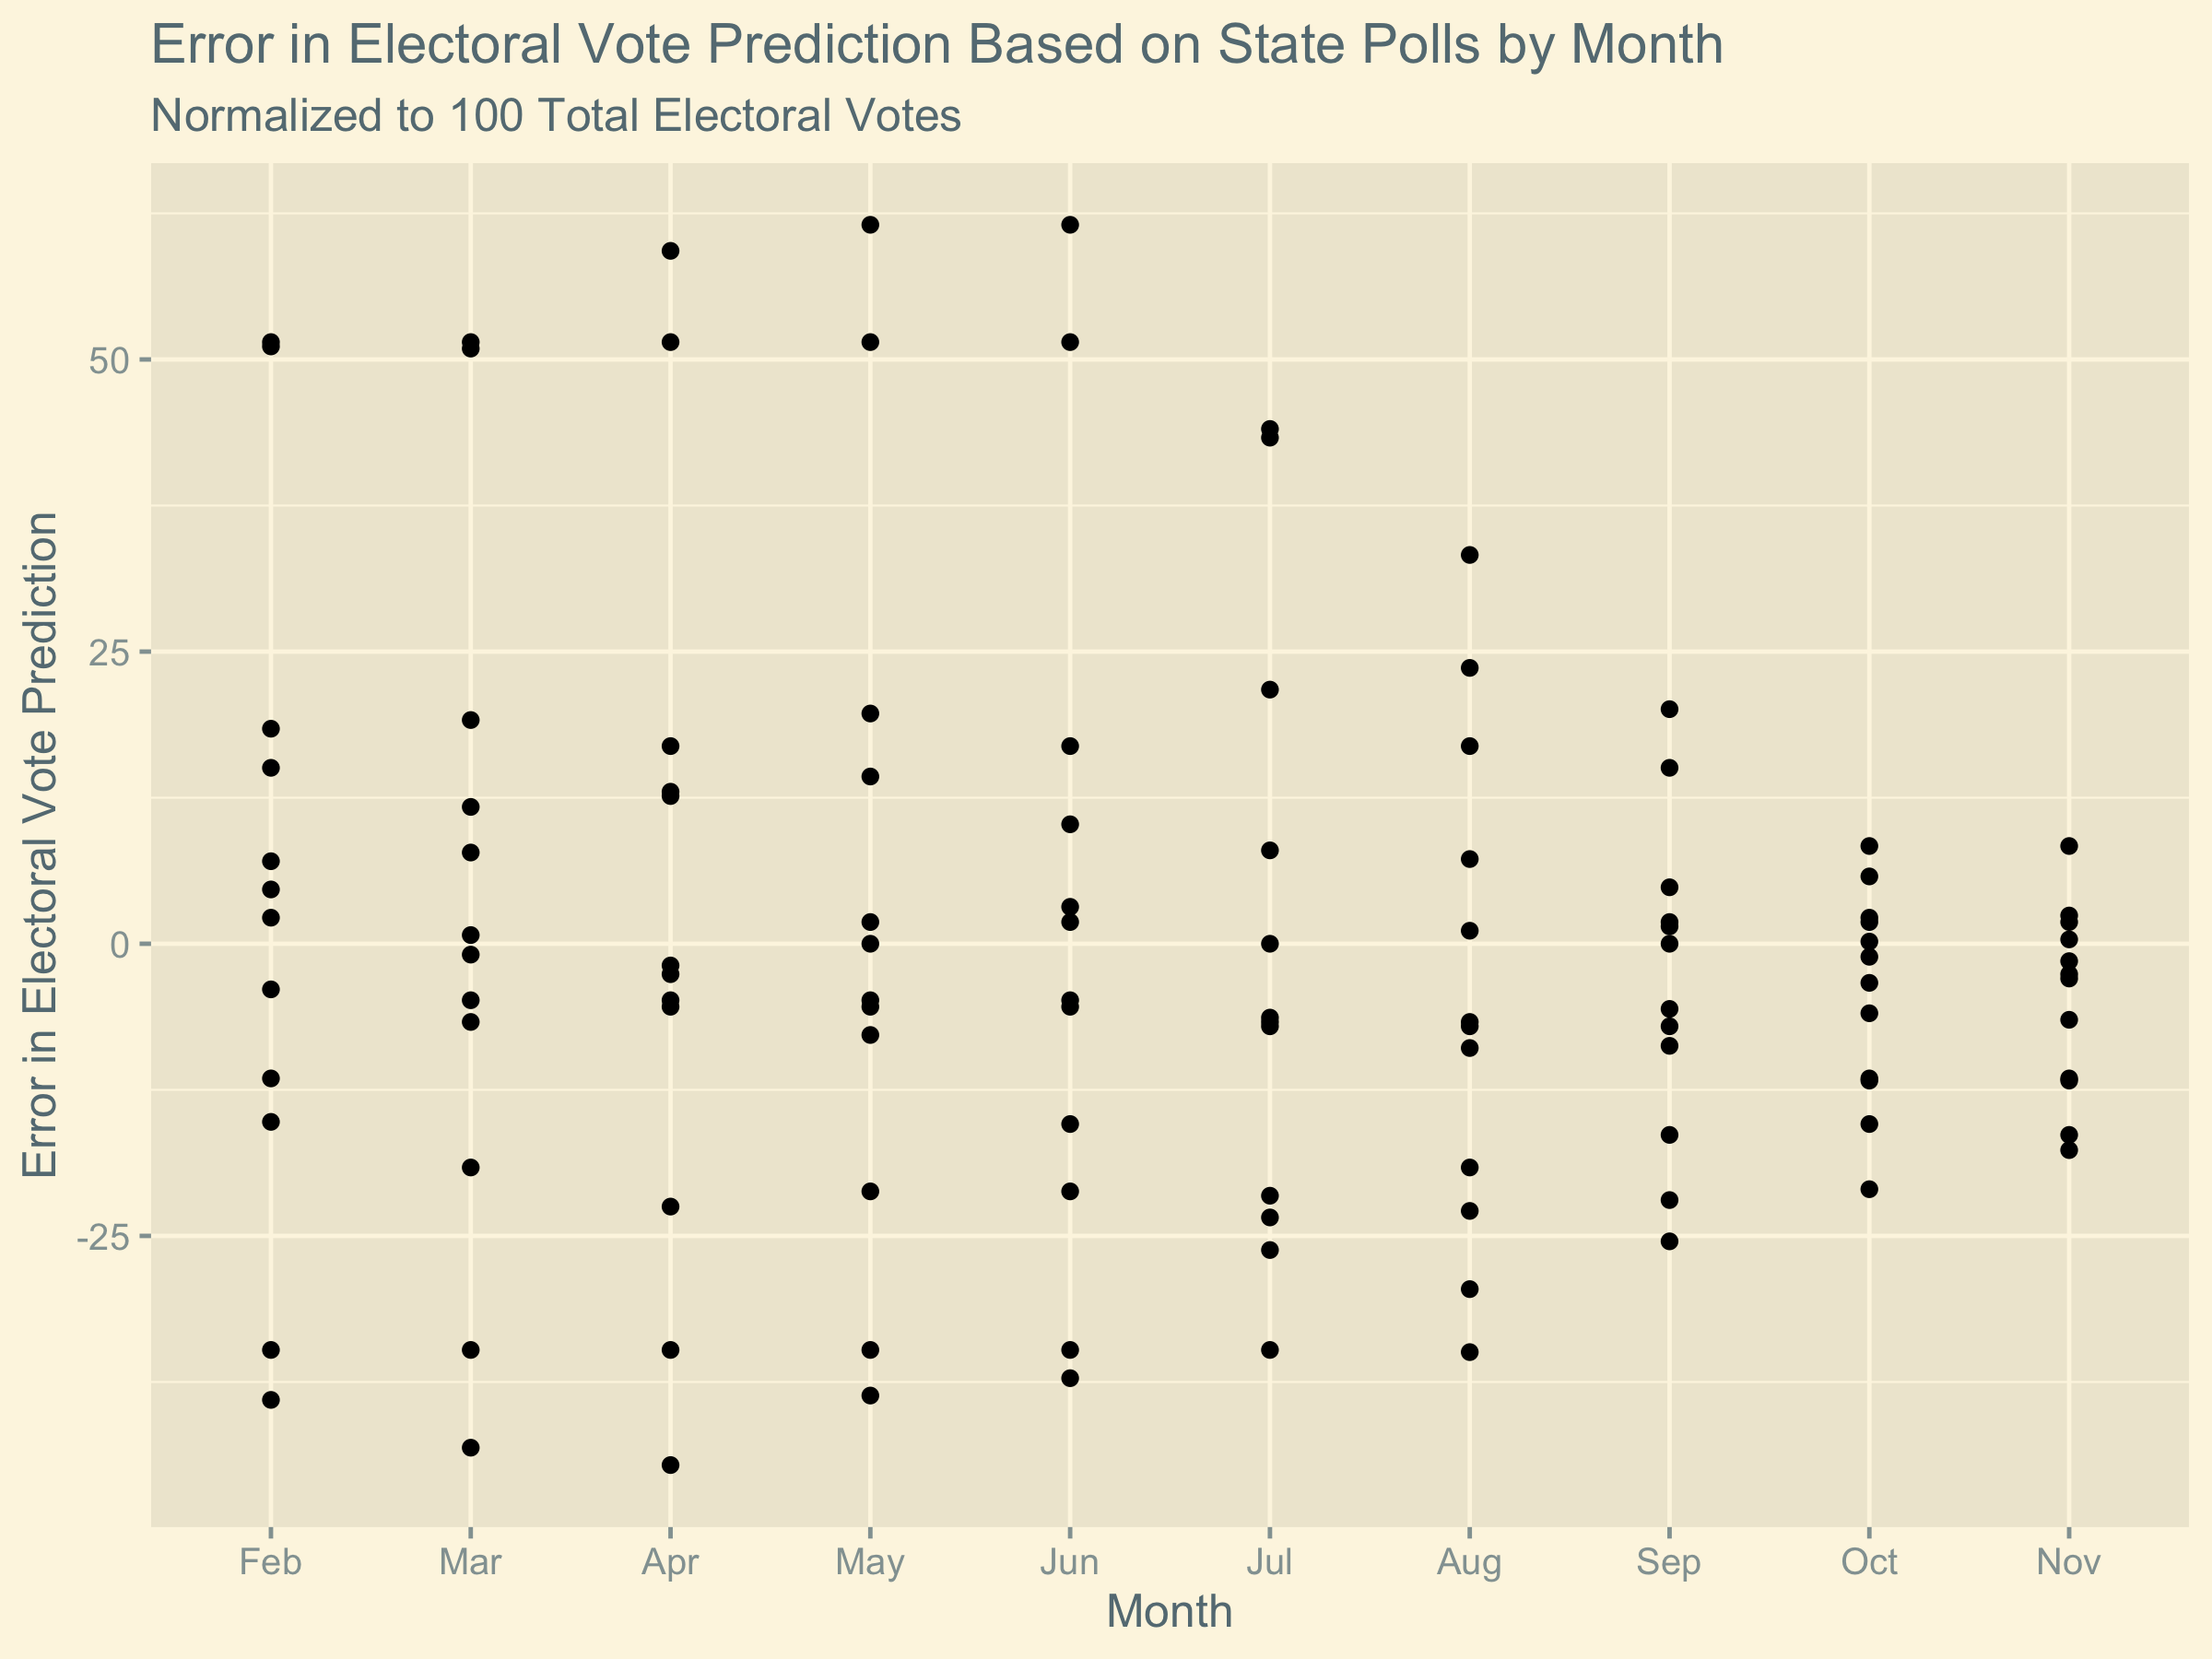 image of state poll accuracy by month